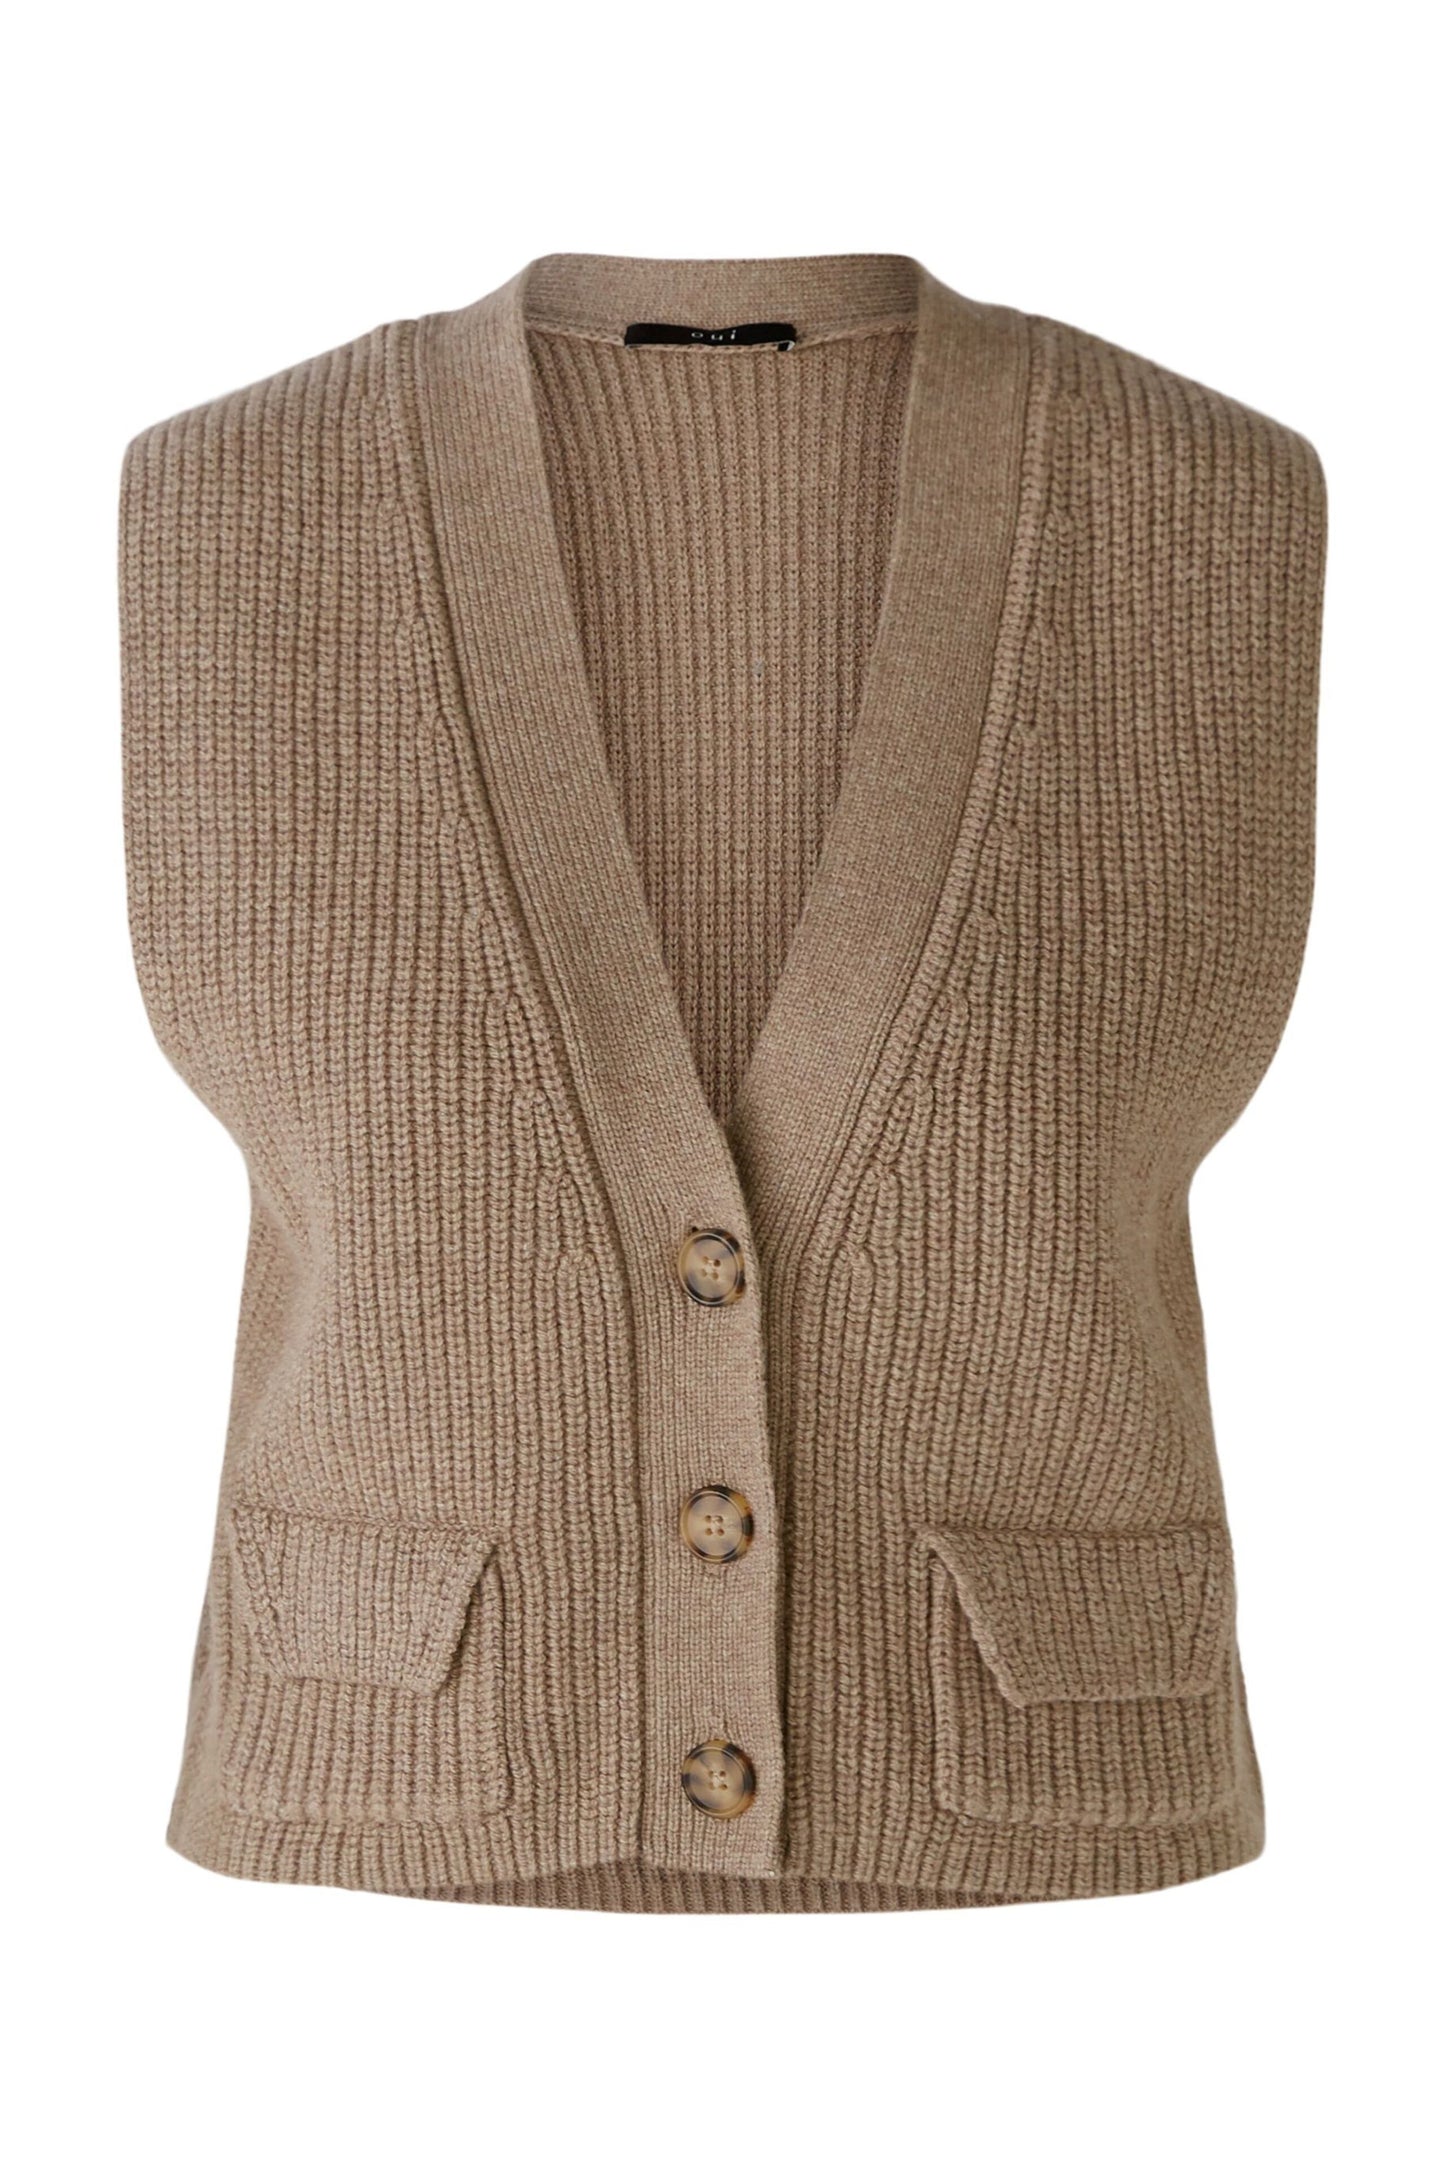 Oui Taupe Knitted Waistcoat